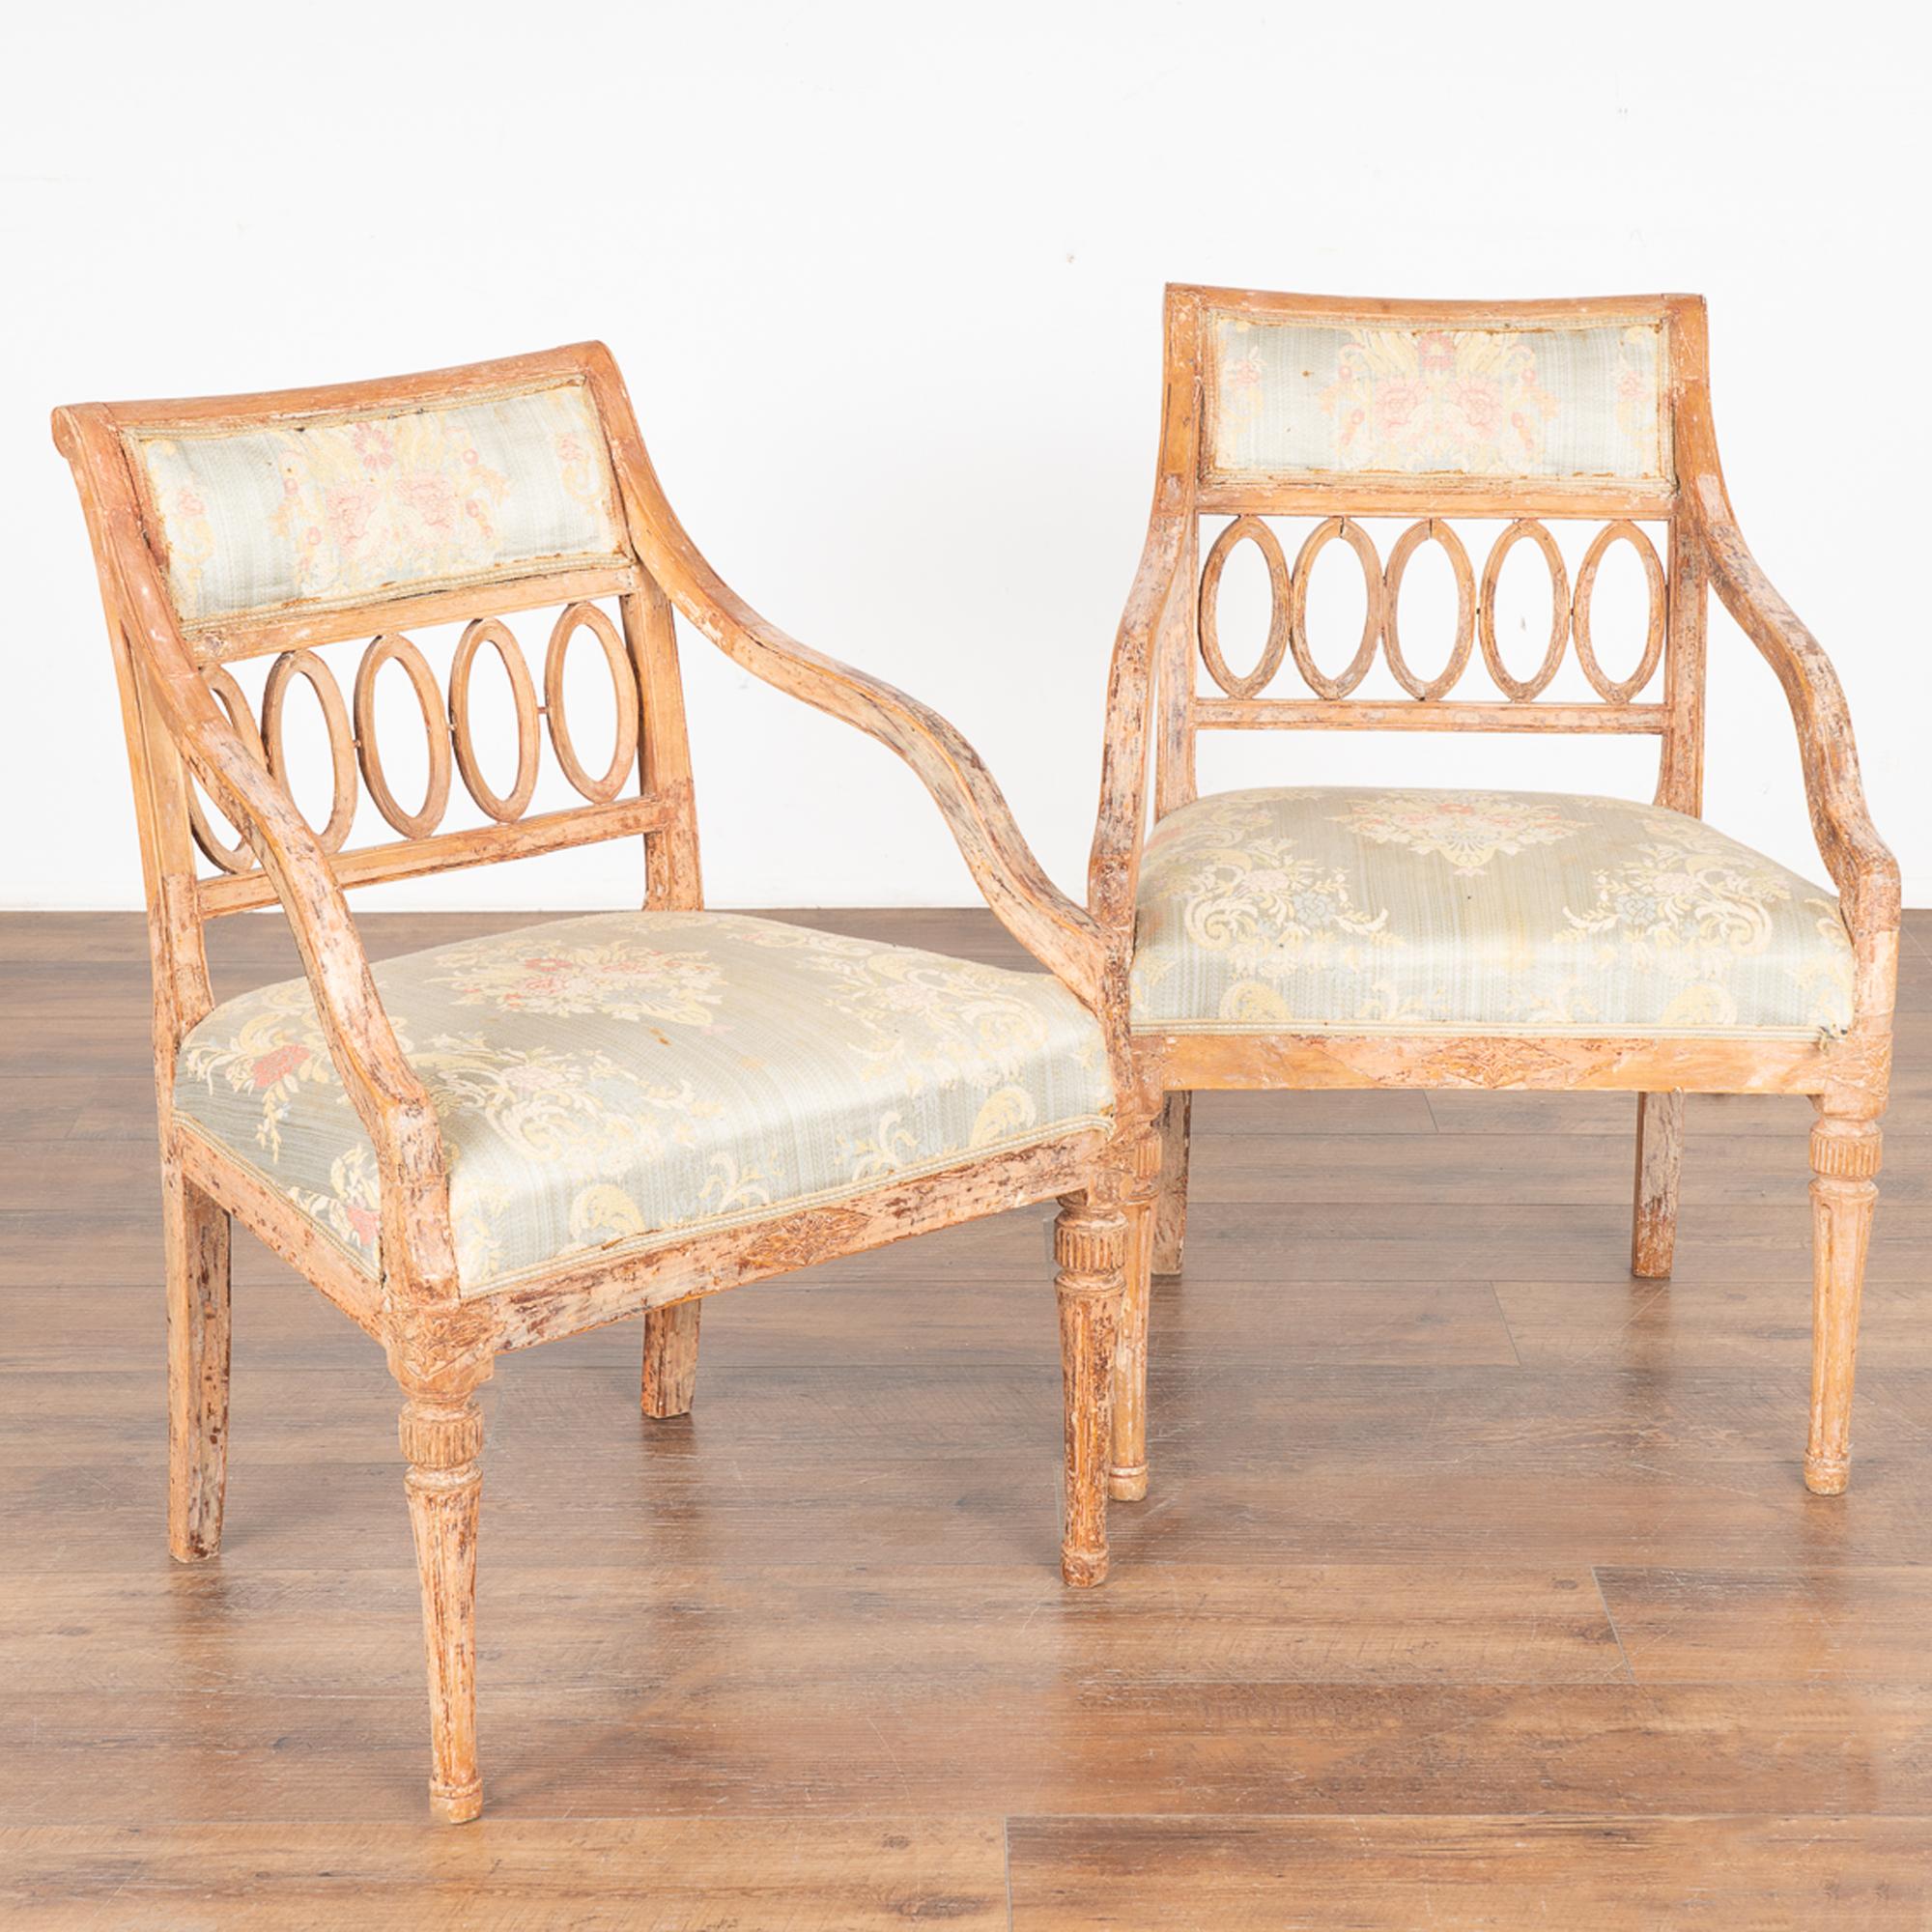 These gustavian armchairs have graceful sloping arms and an attractive open back.
The  lovely original painted finish has been lightly scraped creating a gentle contrast with the hardwood beneath.
Please examine photos closely to appreciate the